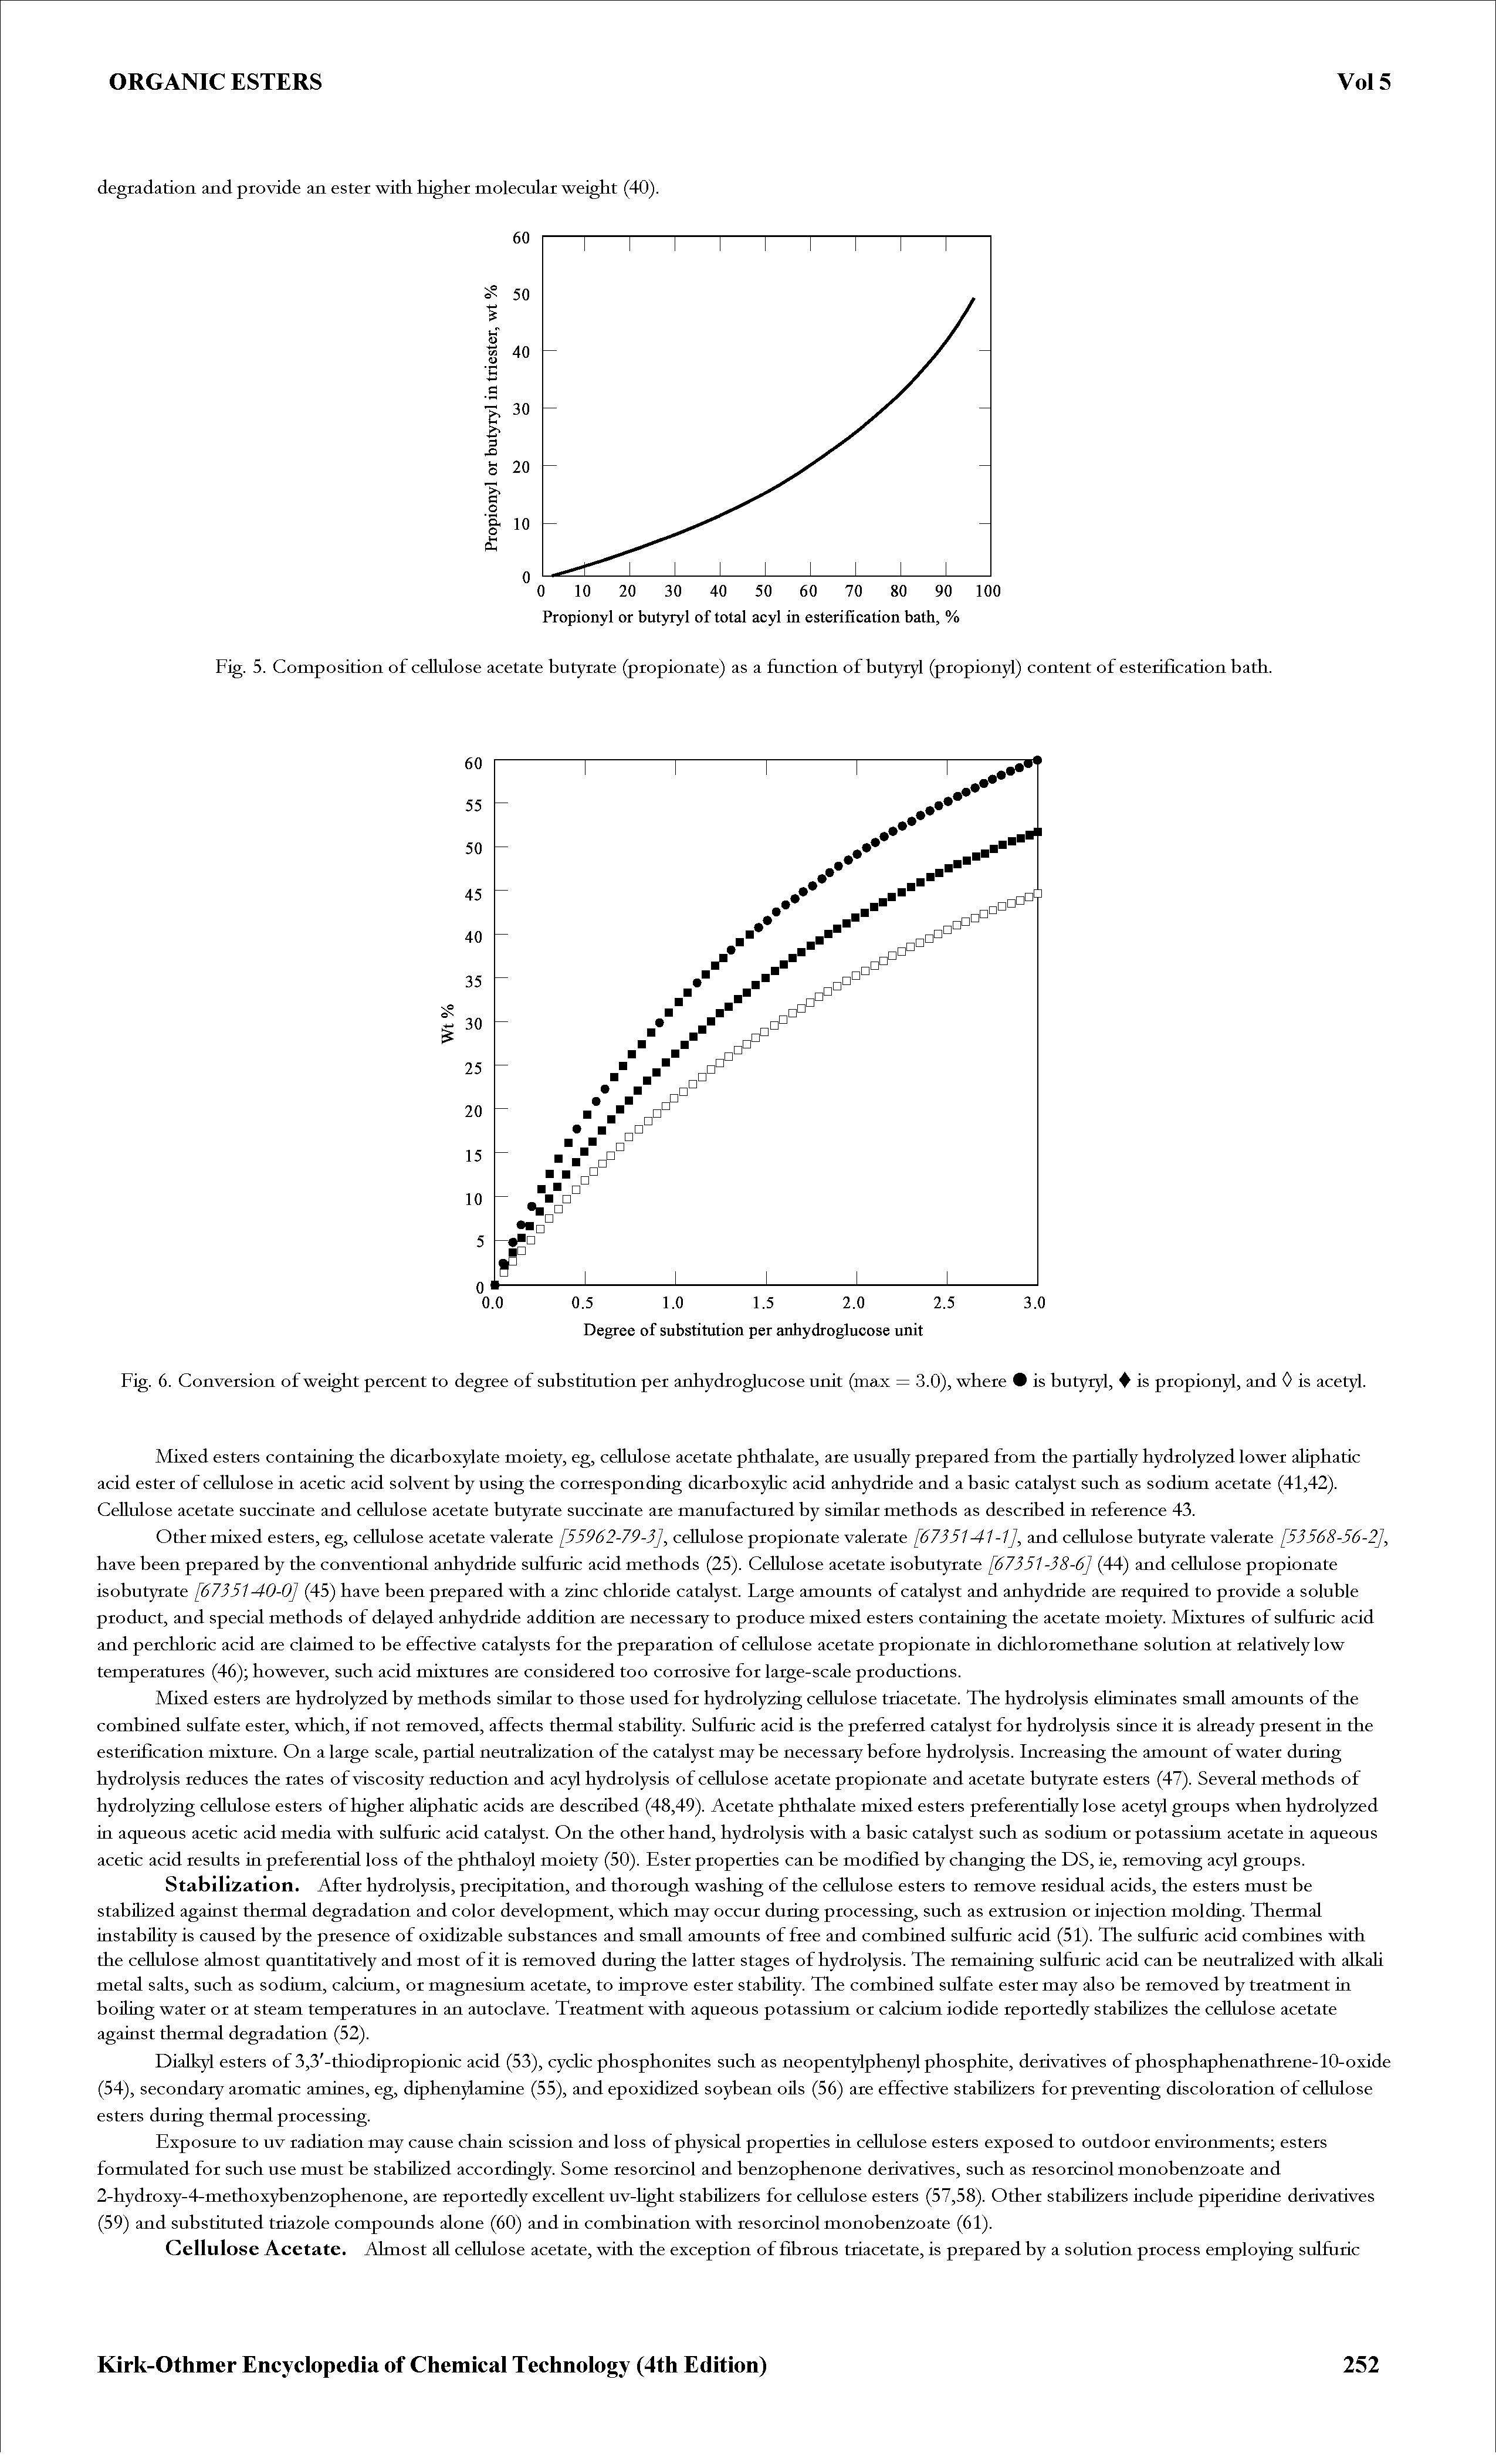 Fig. 6. Conversion of weight percent to degree of substitution per anhydroglucose unit (max = 3.0), where is butyryl, is propionyl, and 0 is acetyl.